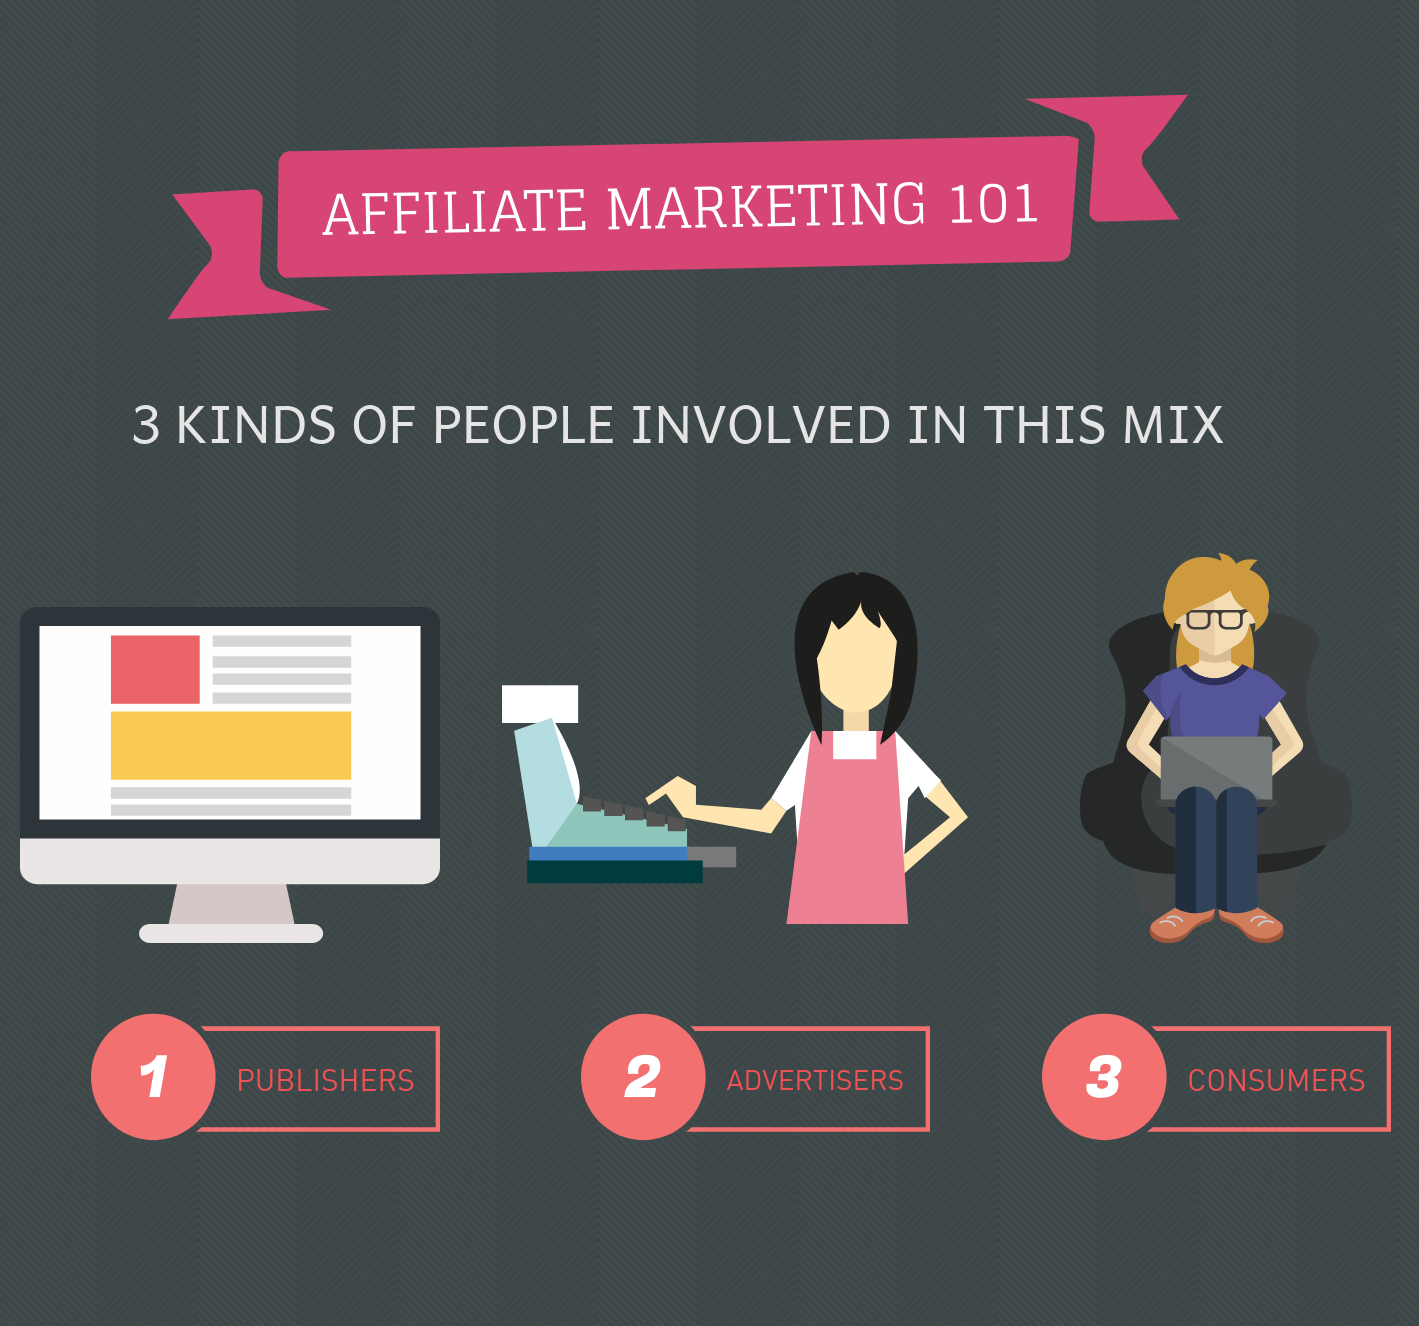 Here are some pointers to a successful affiliate.